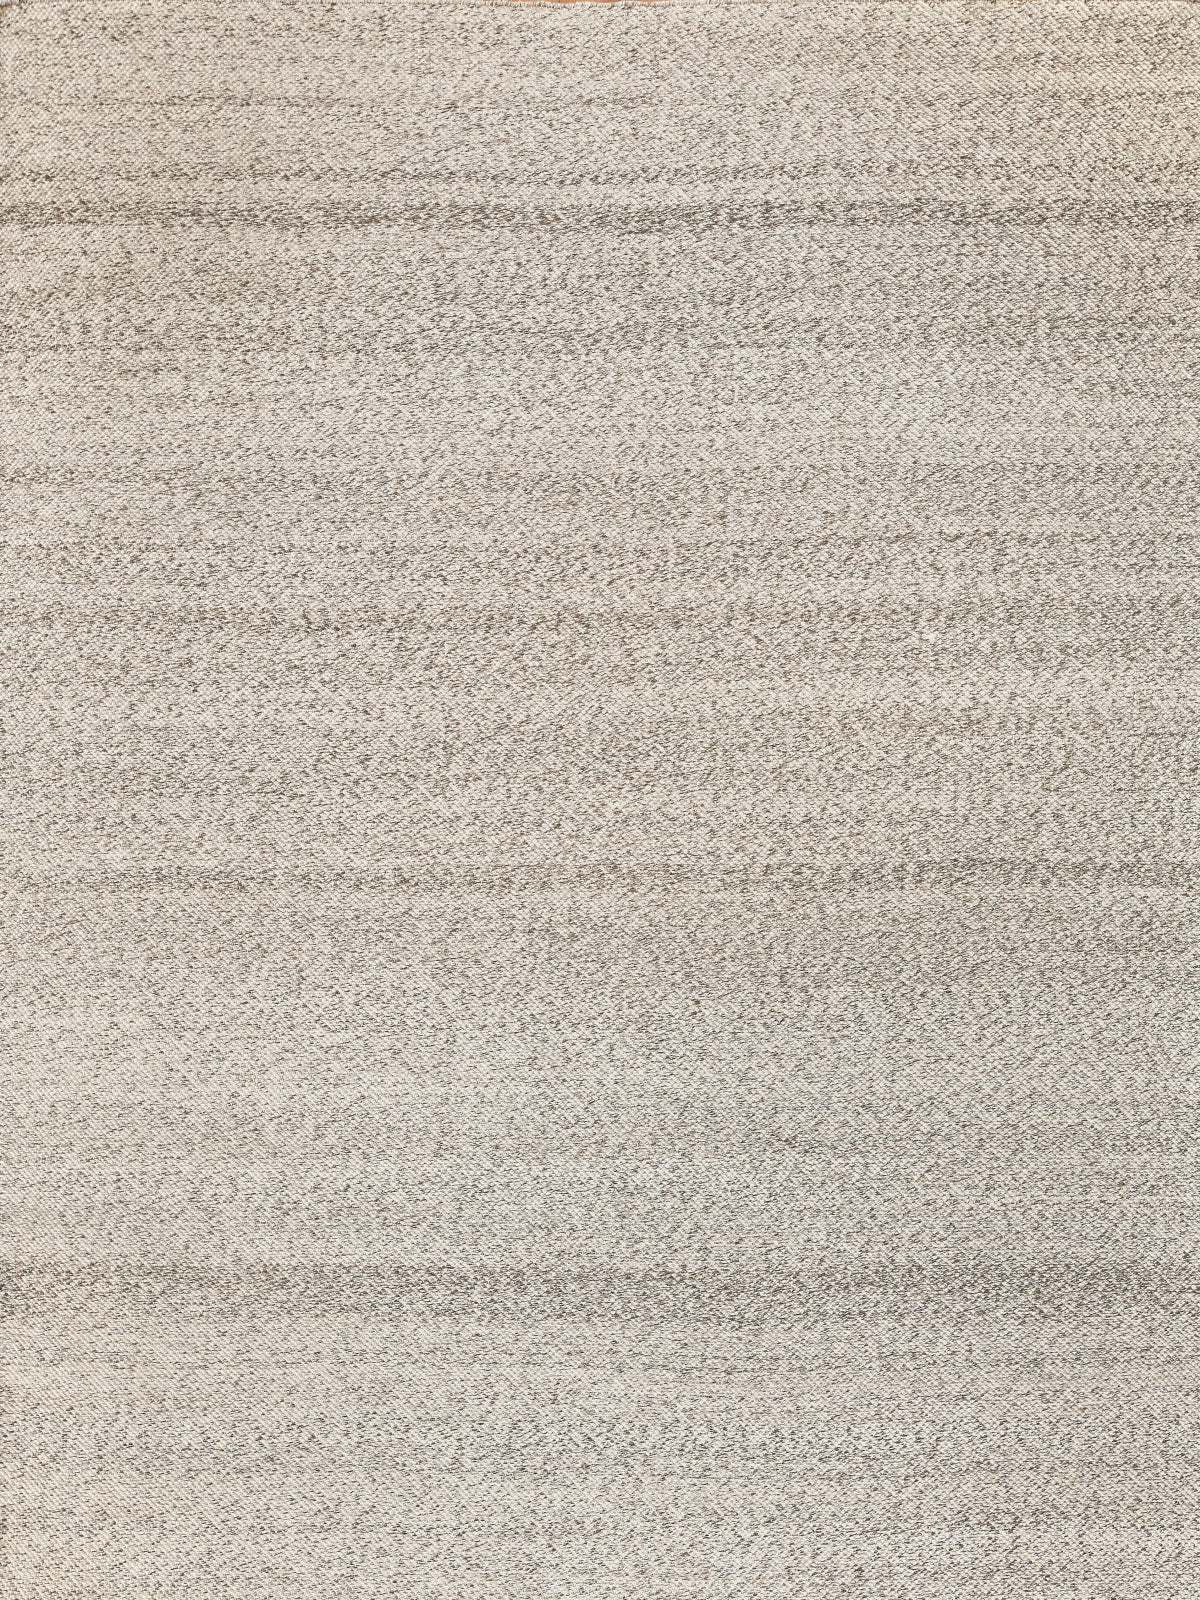 Exquisite Rugs Rhodes 4567 Taupe Area Rug main image